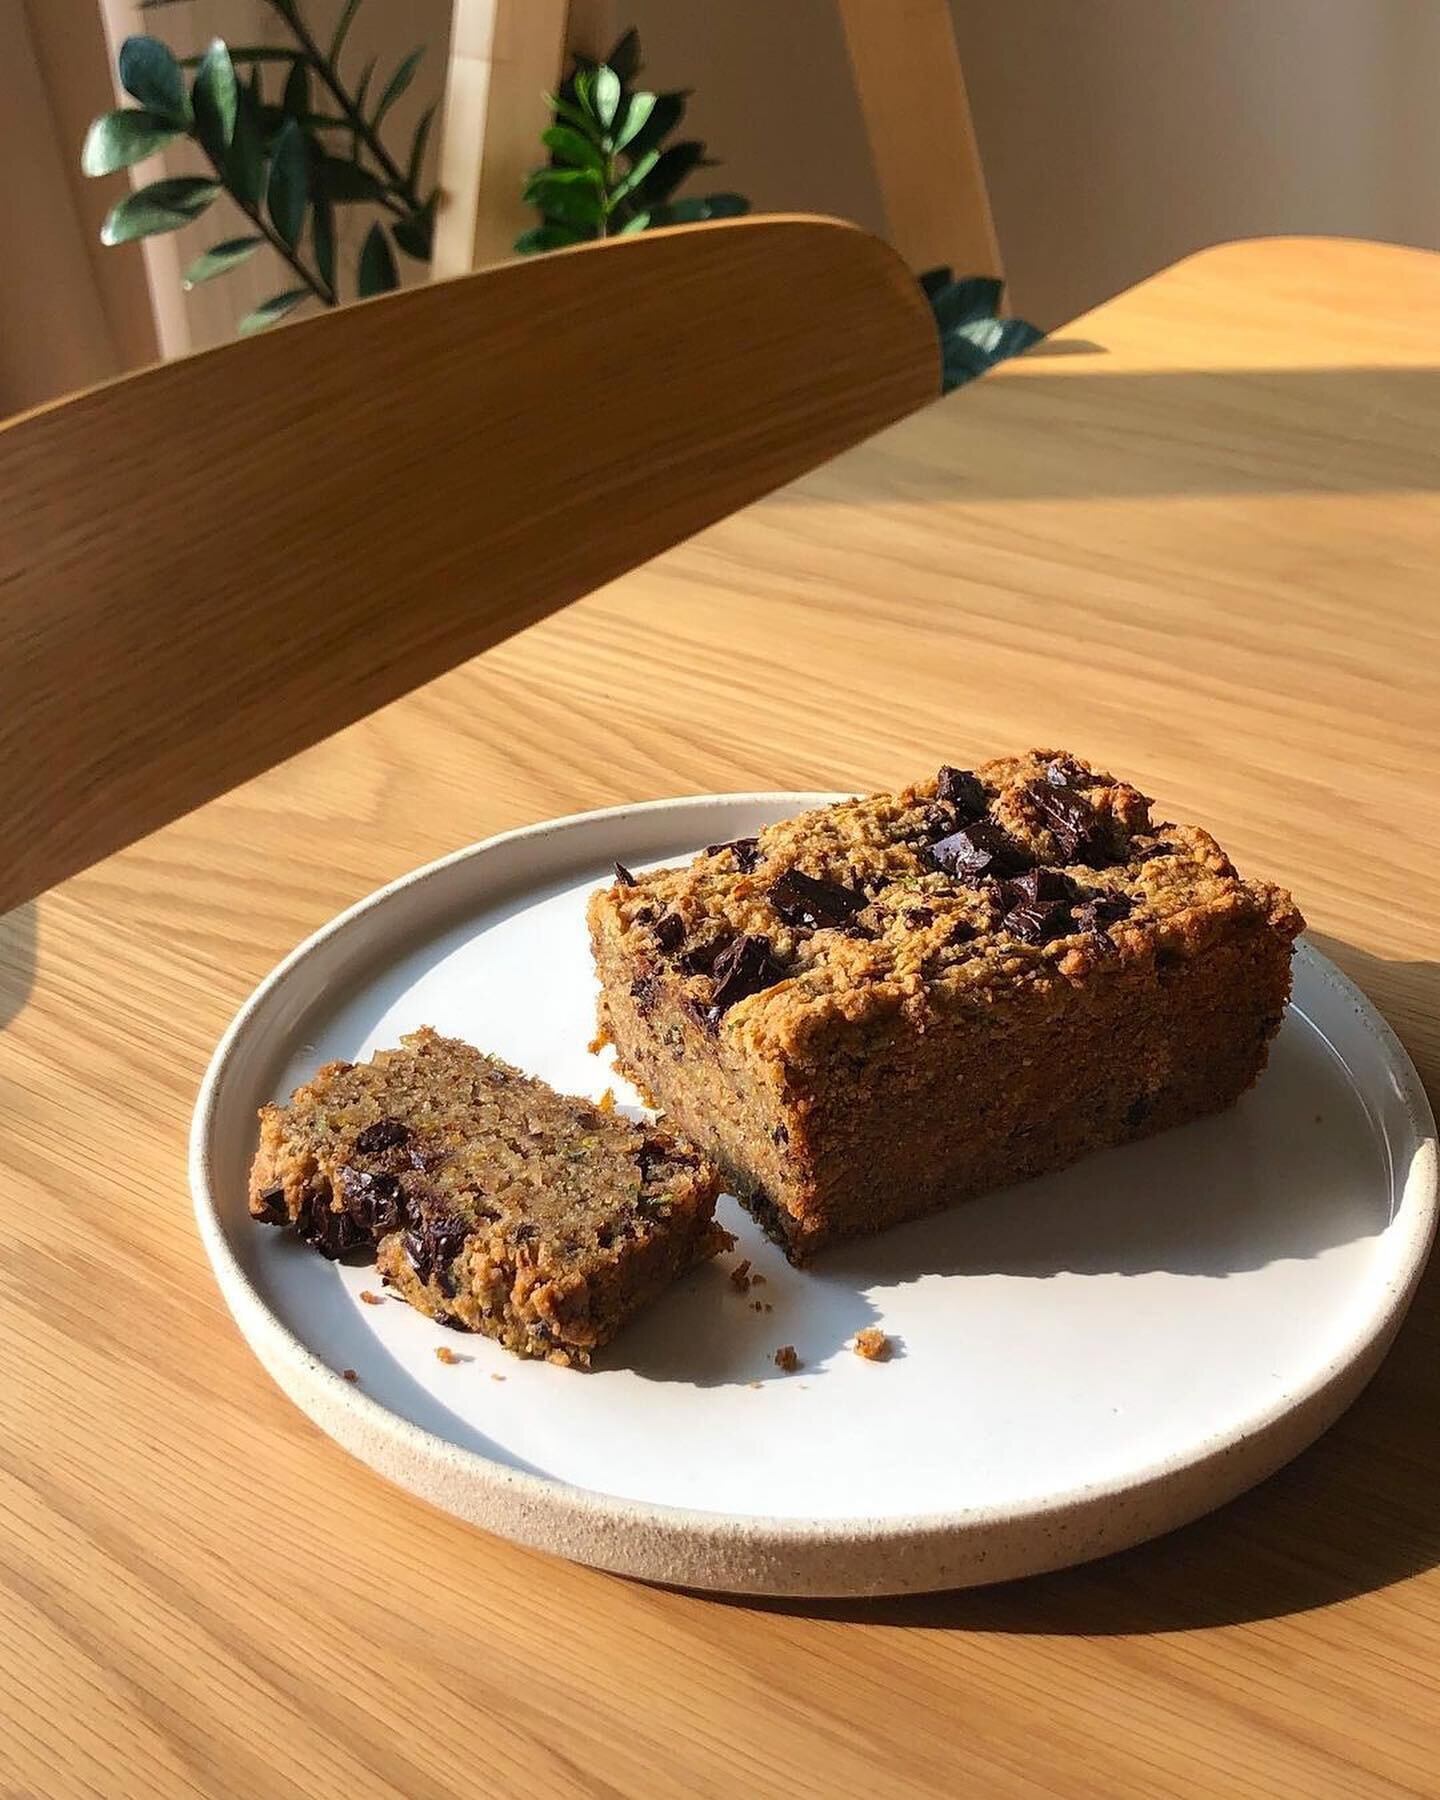 Last minute v-day loaf for your loved ones? 💘Yes please! @mackenziereid made this delish Zucchini Muffin Bread with @momoscbd chocolate from a #gifting we ran with them 💫

🍞ABOUT THE CREATOR🍞
Mackenzie&rsquo;s social platform is an amalgamation o